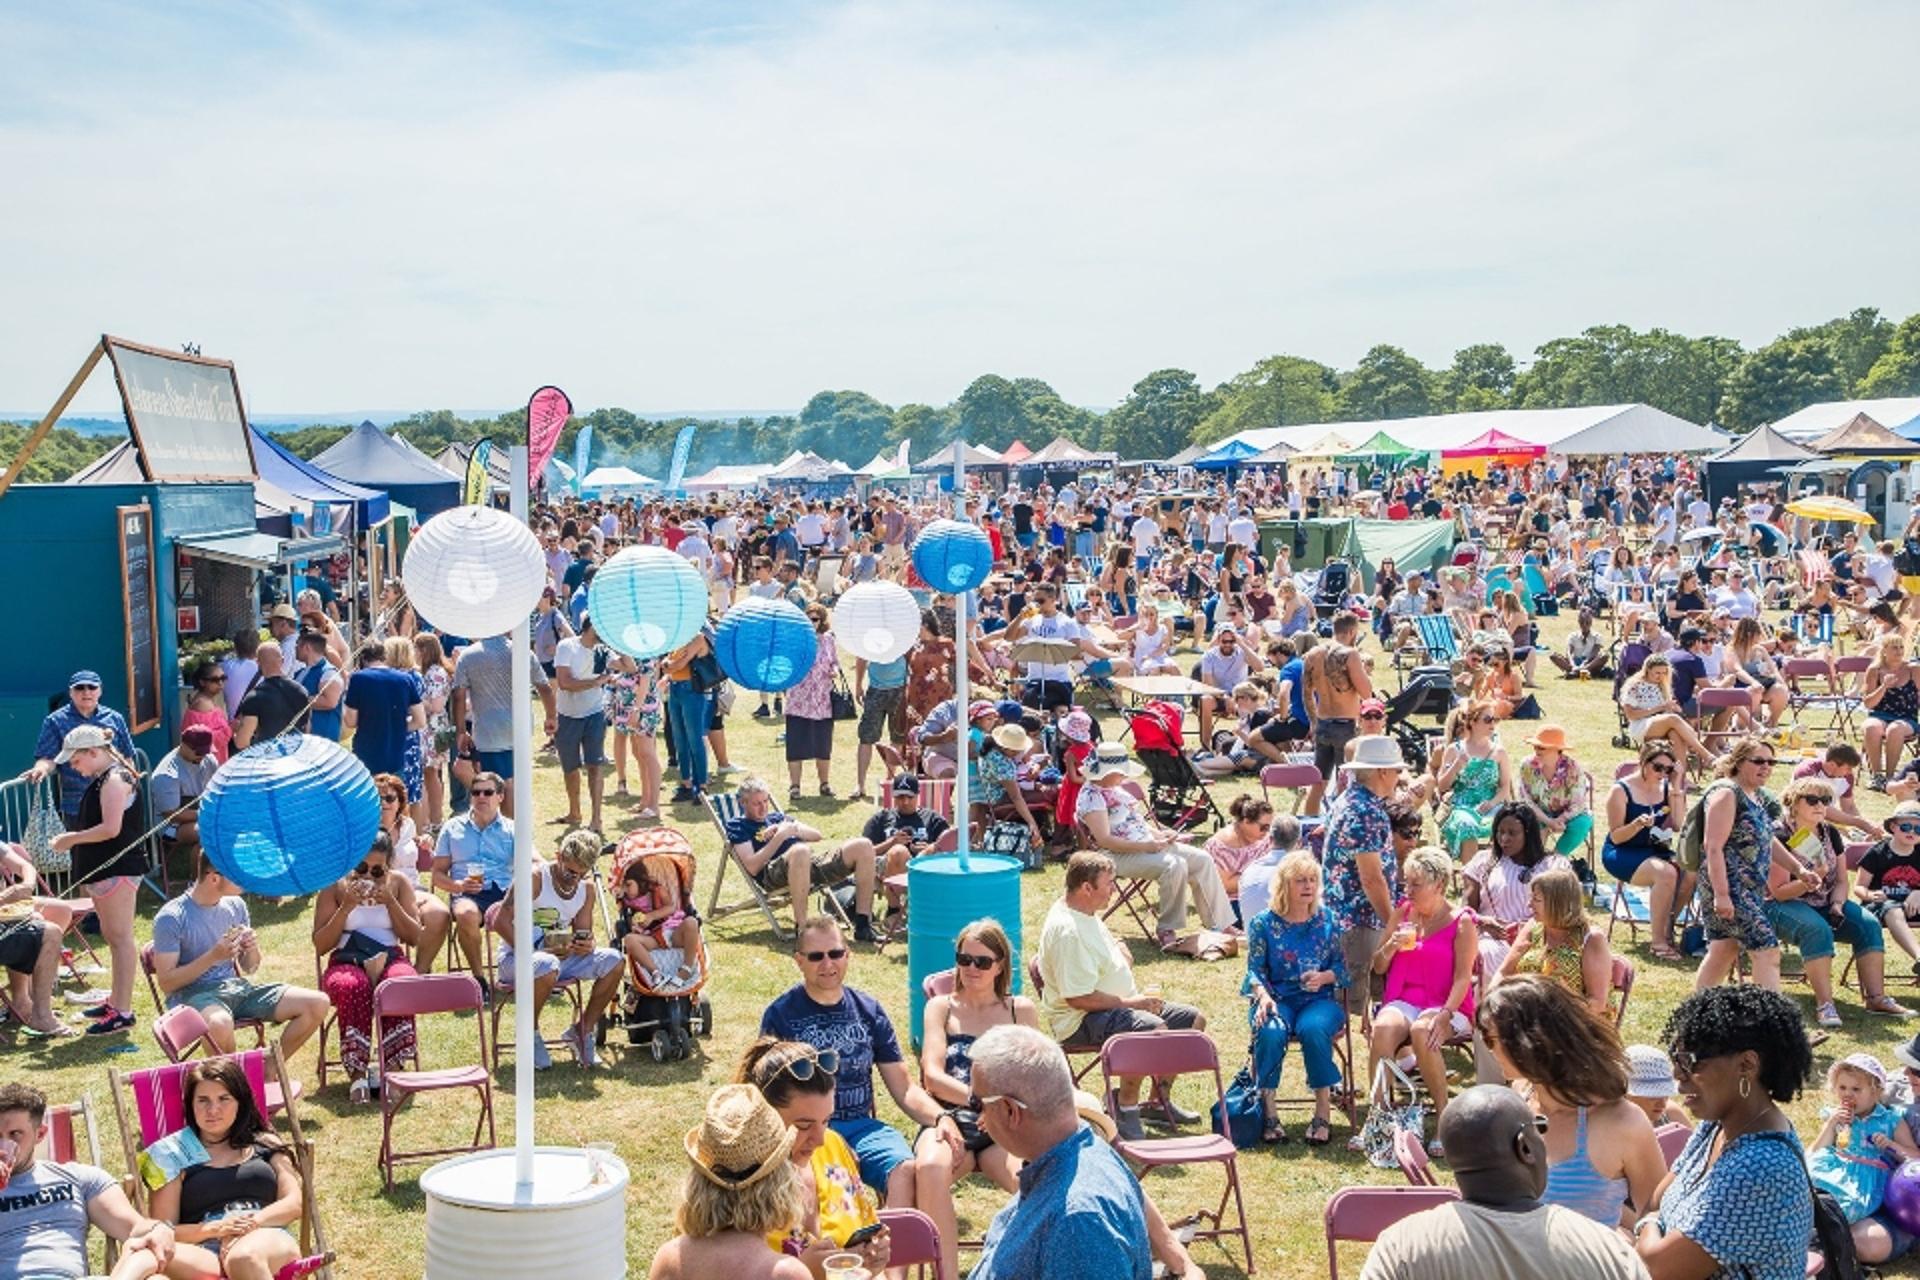 Assets and IP of food and drink festival acquired from liquidators